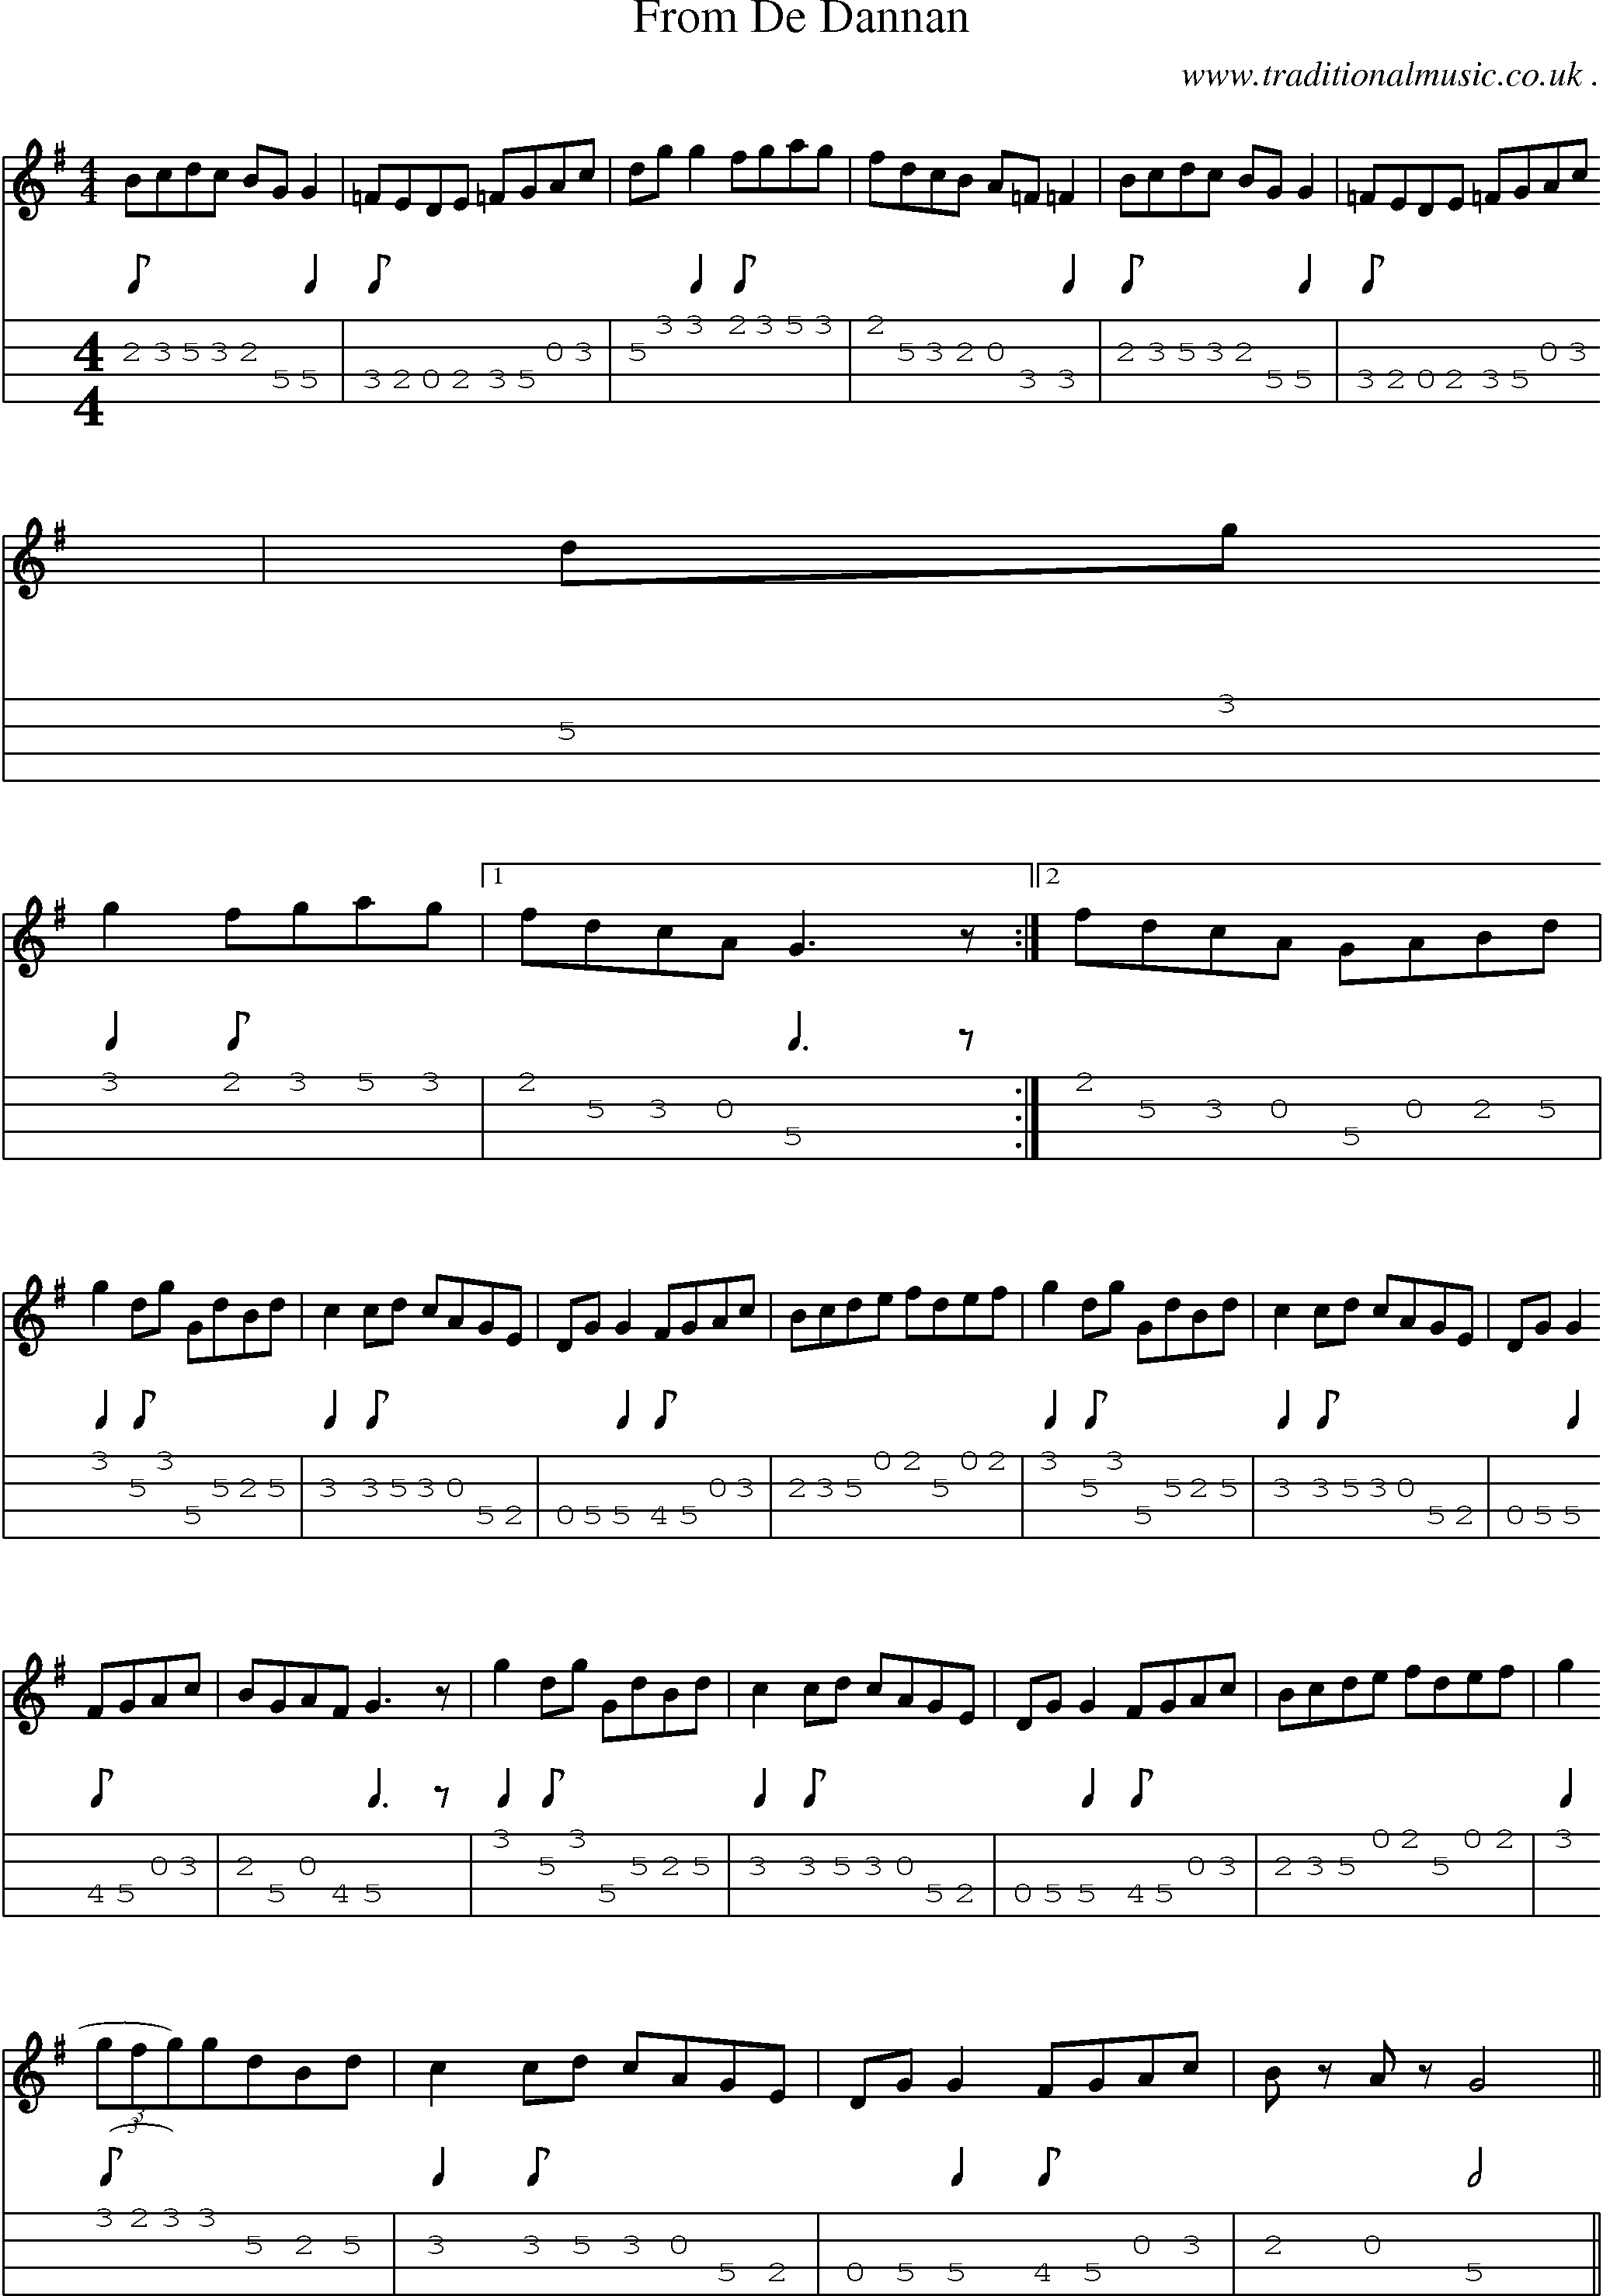 Sheet-Music and Mandolin Tabs for From De Dannan